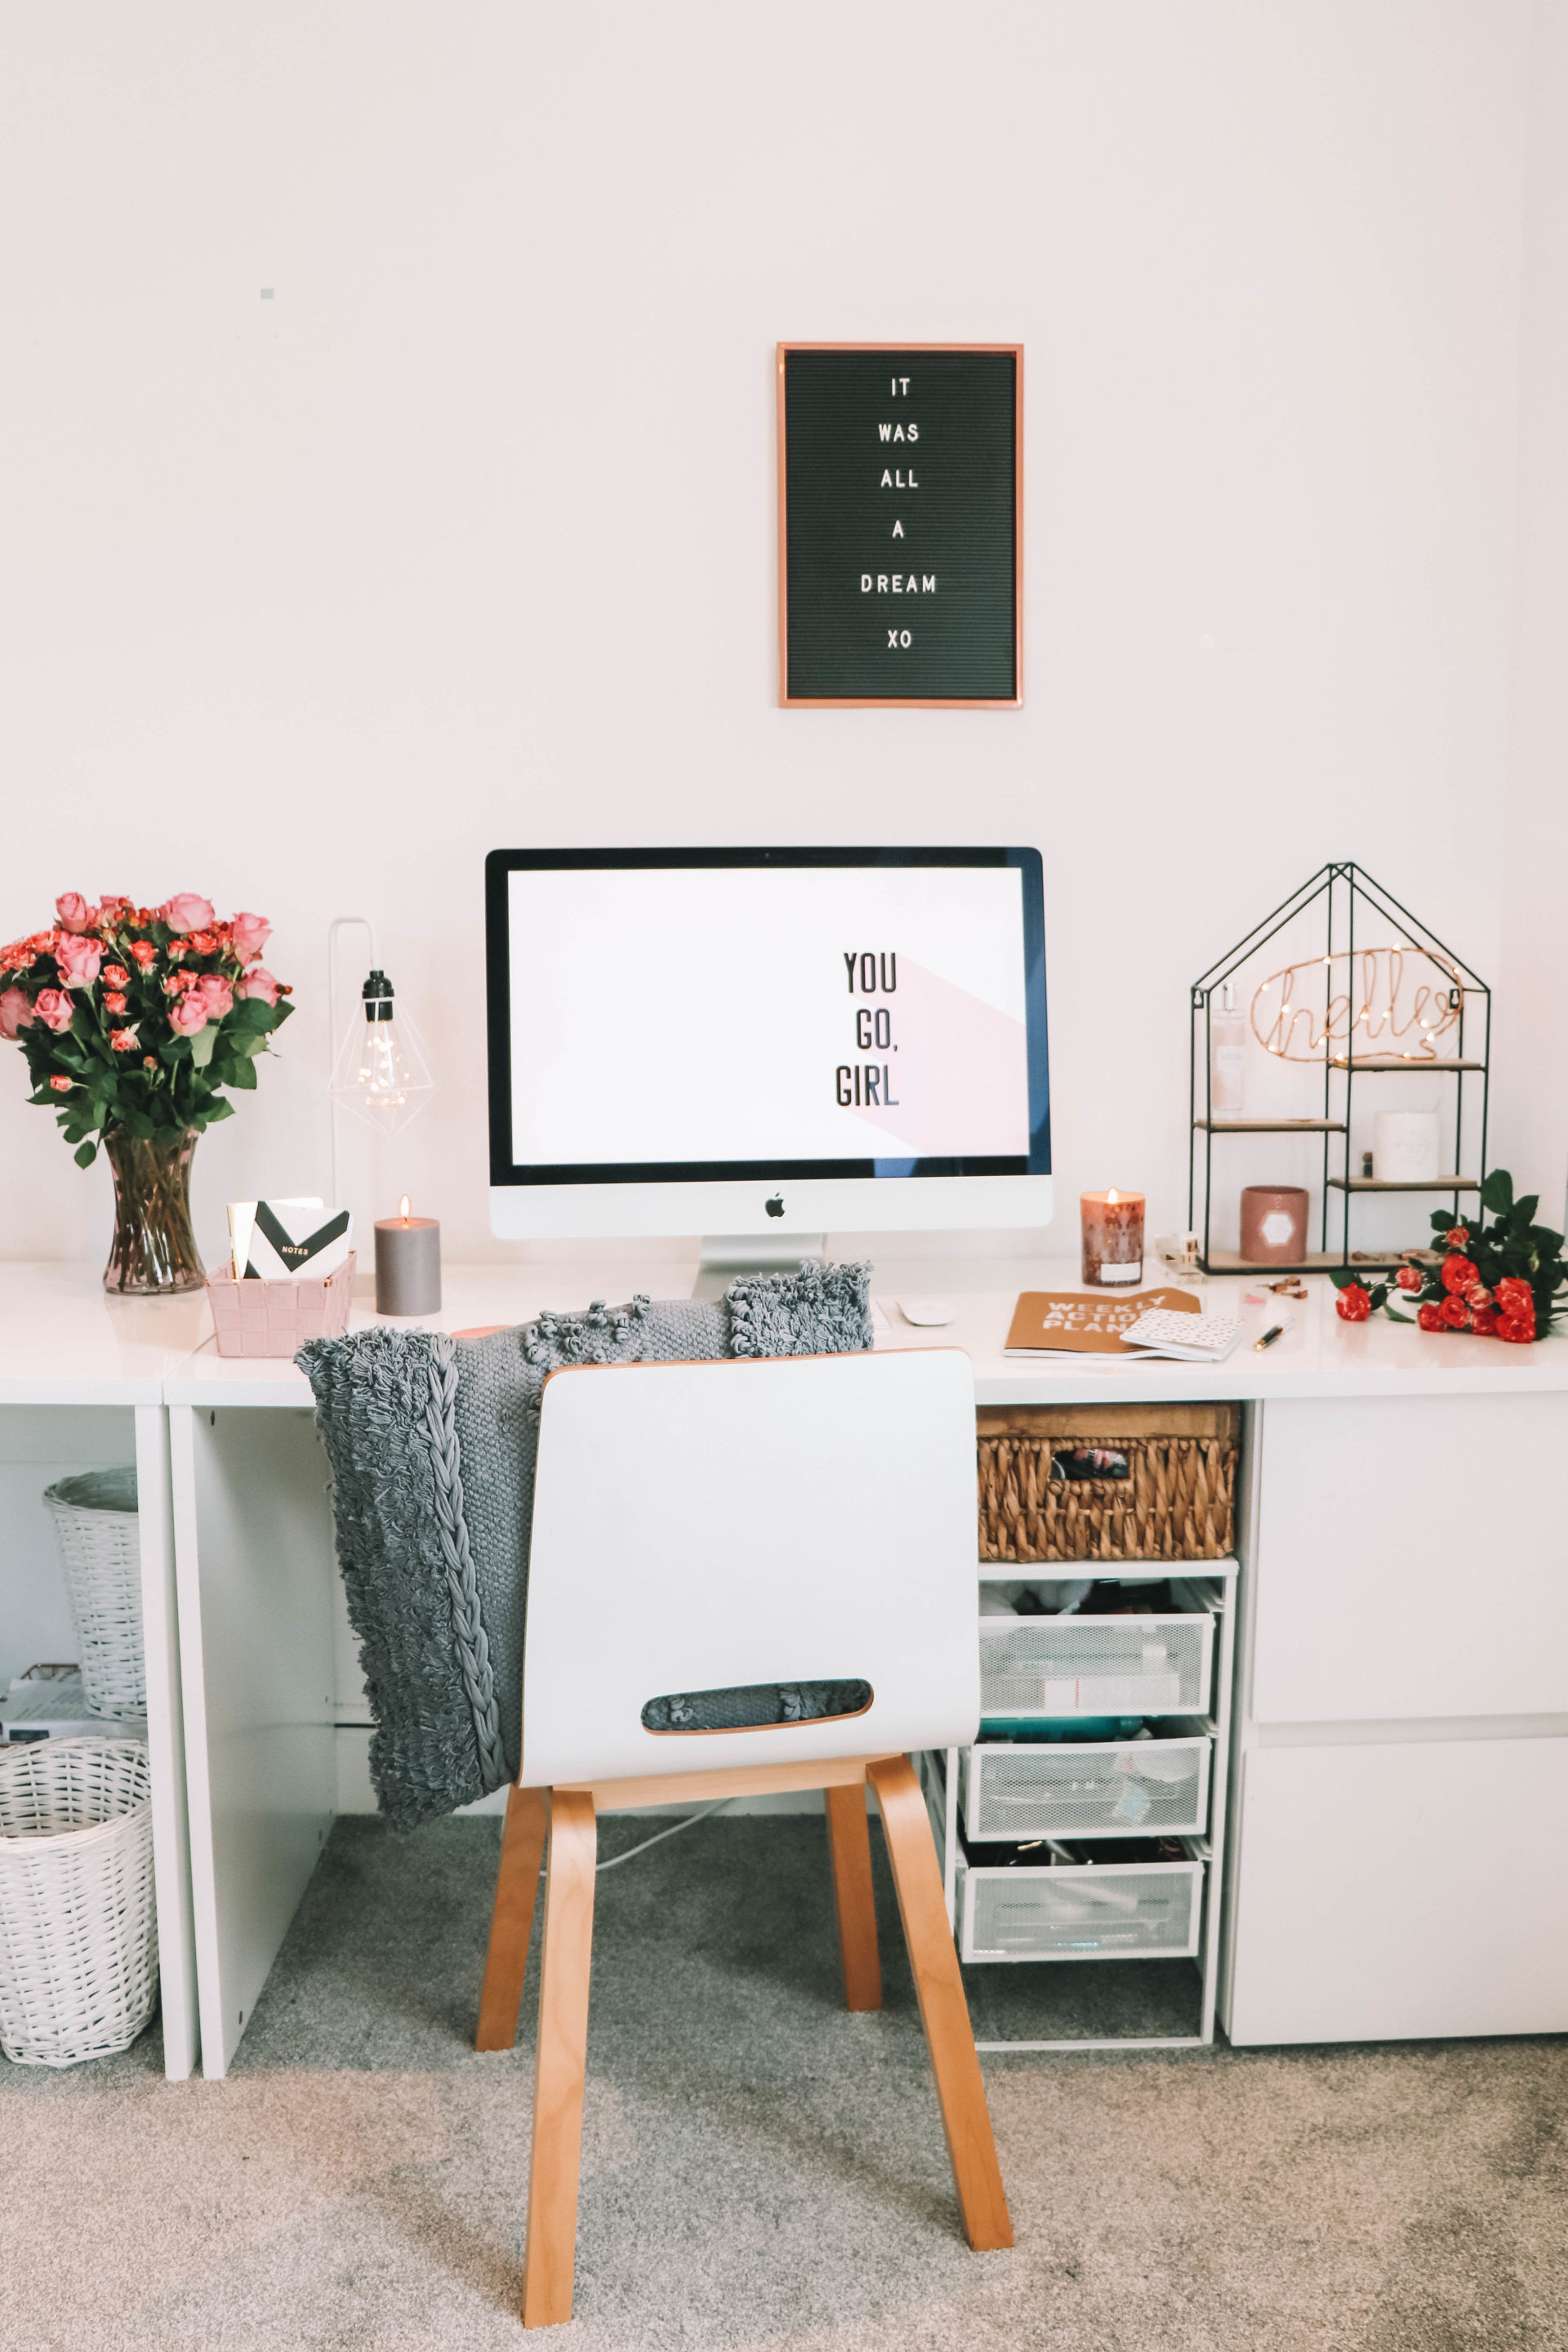 How To Update Your Home Office On A Shoestring Budget